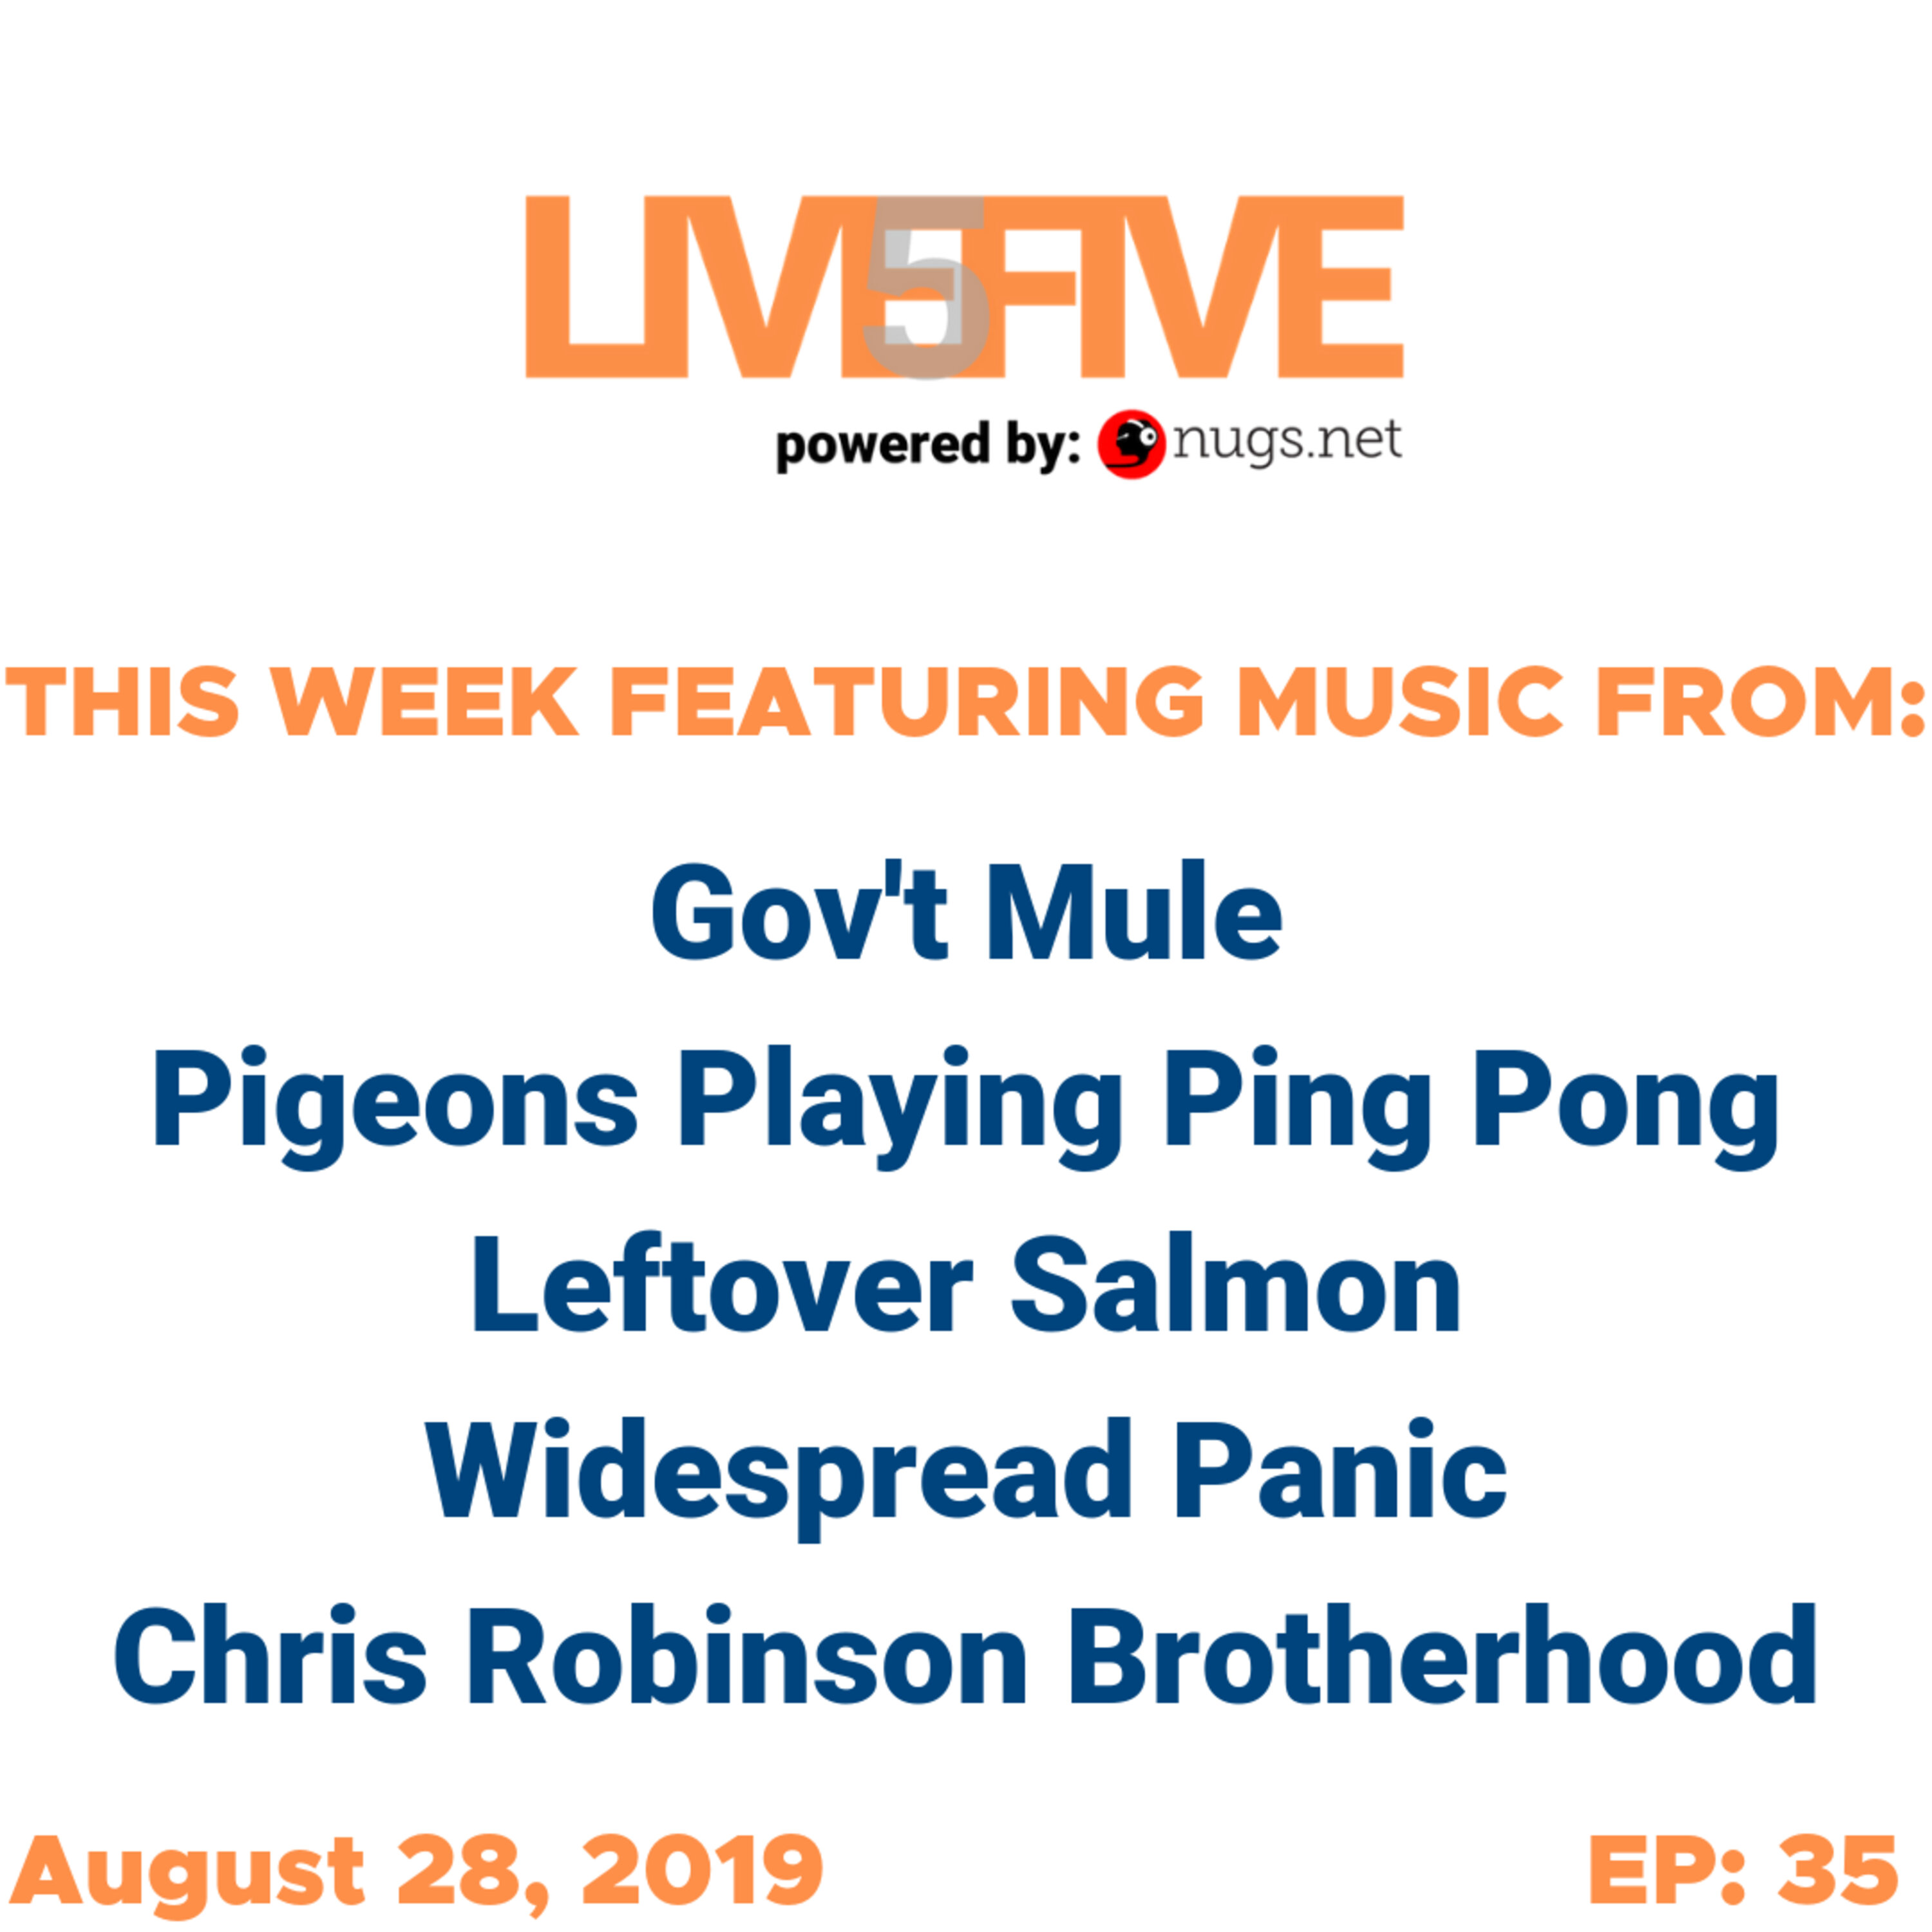 Live 5 - August 28, 2019. Image